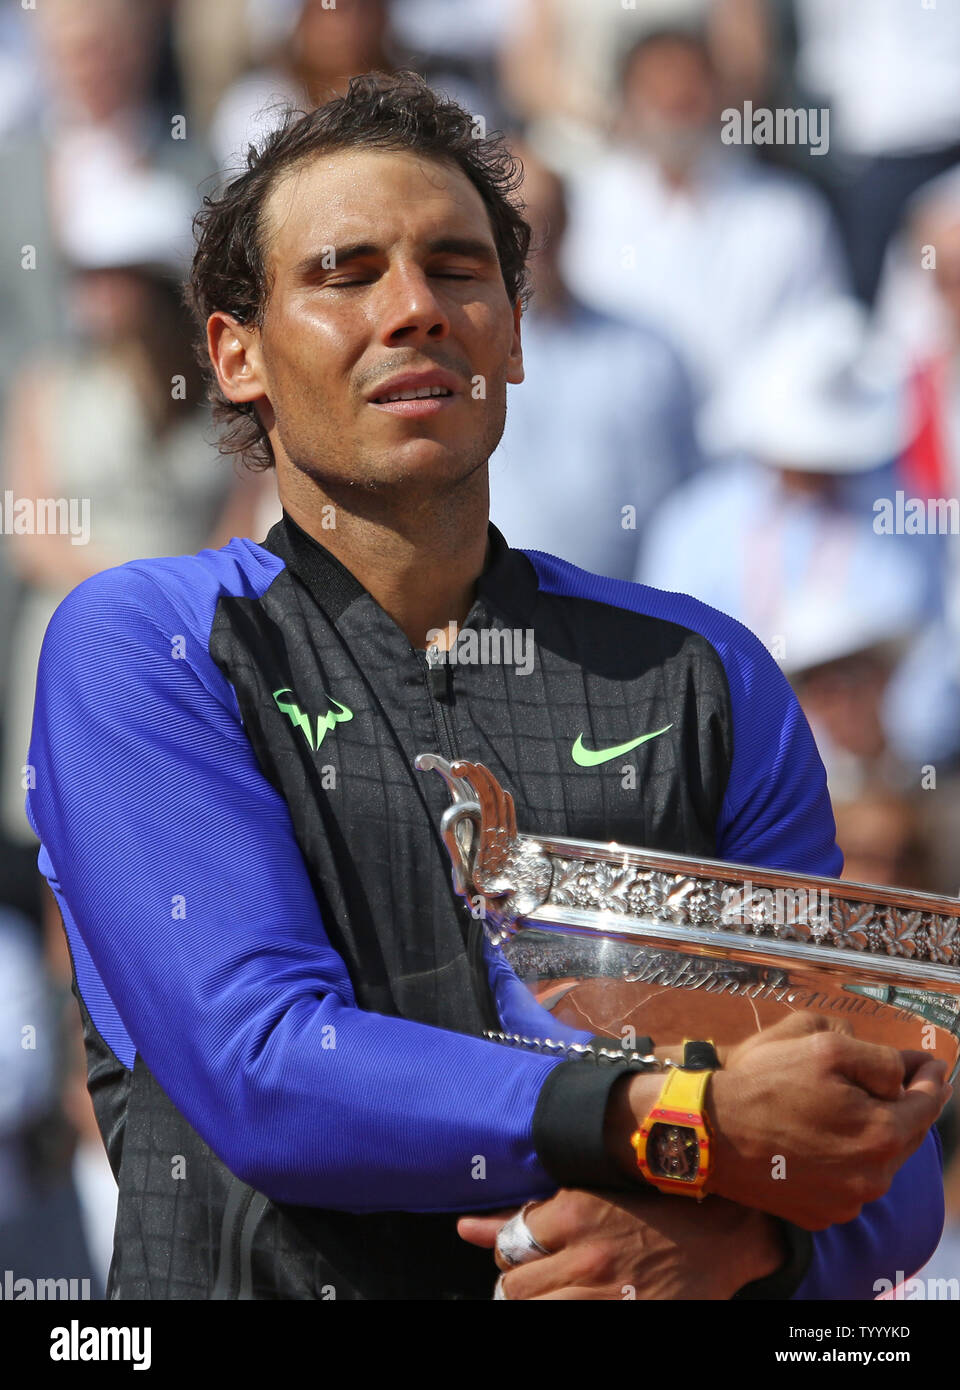 svag aflivning rense Rafael Nadal of Spain holds the championship trophy after winning his French  Open men's final match against Stan Wawrinka of Switzerland at Roland Garros  in Paris on June 11, 2017. Nadal defeated